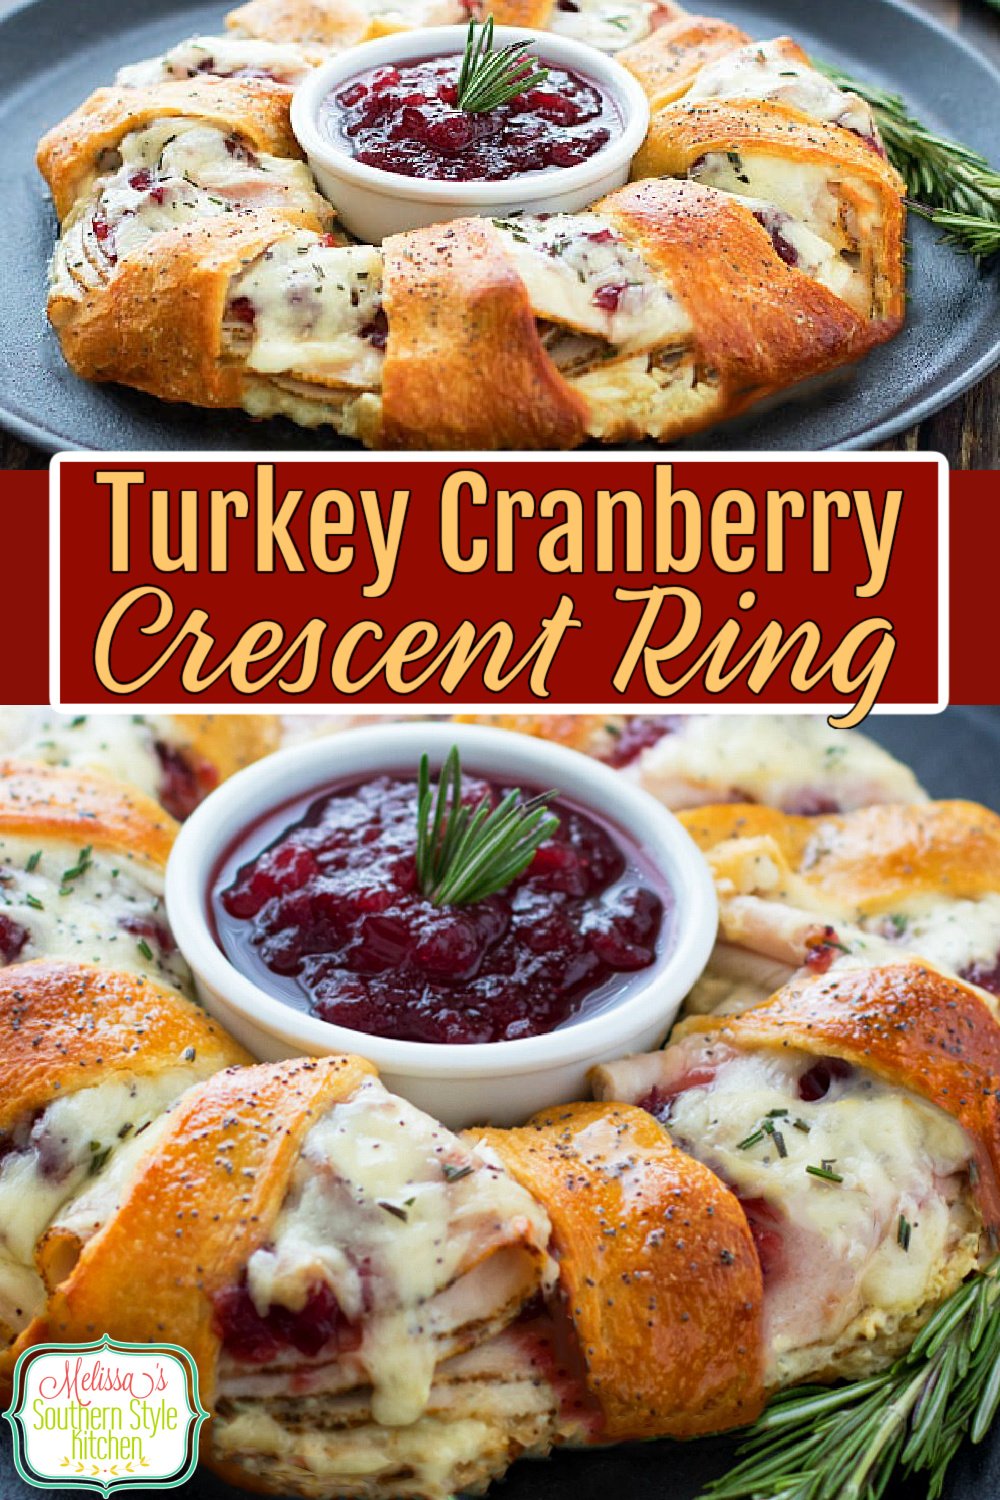 Turn leftover turkey or deli turkey into a rock star snack with this Turkey Cranberry Crescent Ring #turkey #leftoverturkey #crescentrolls #turkeycrescentring #thanksgiving #fallbaking #appetizers #christmas #southernfood #southernrecipes #cranberrysauce via @melissasssk